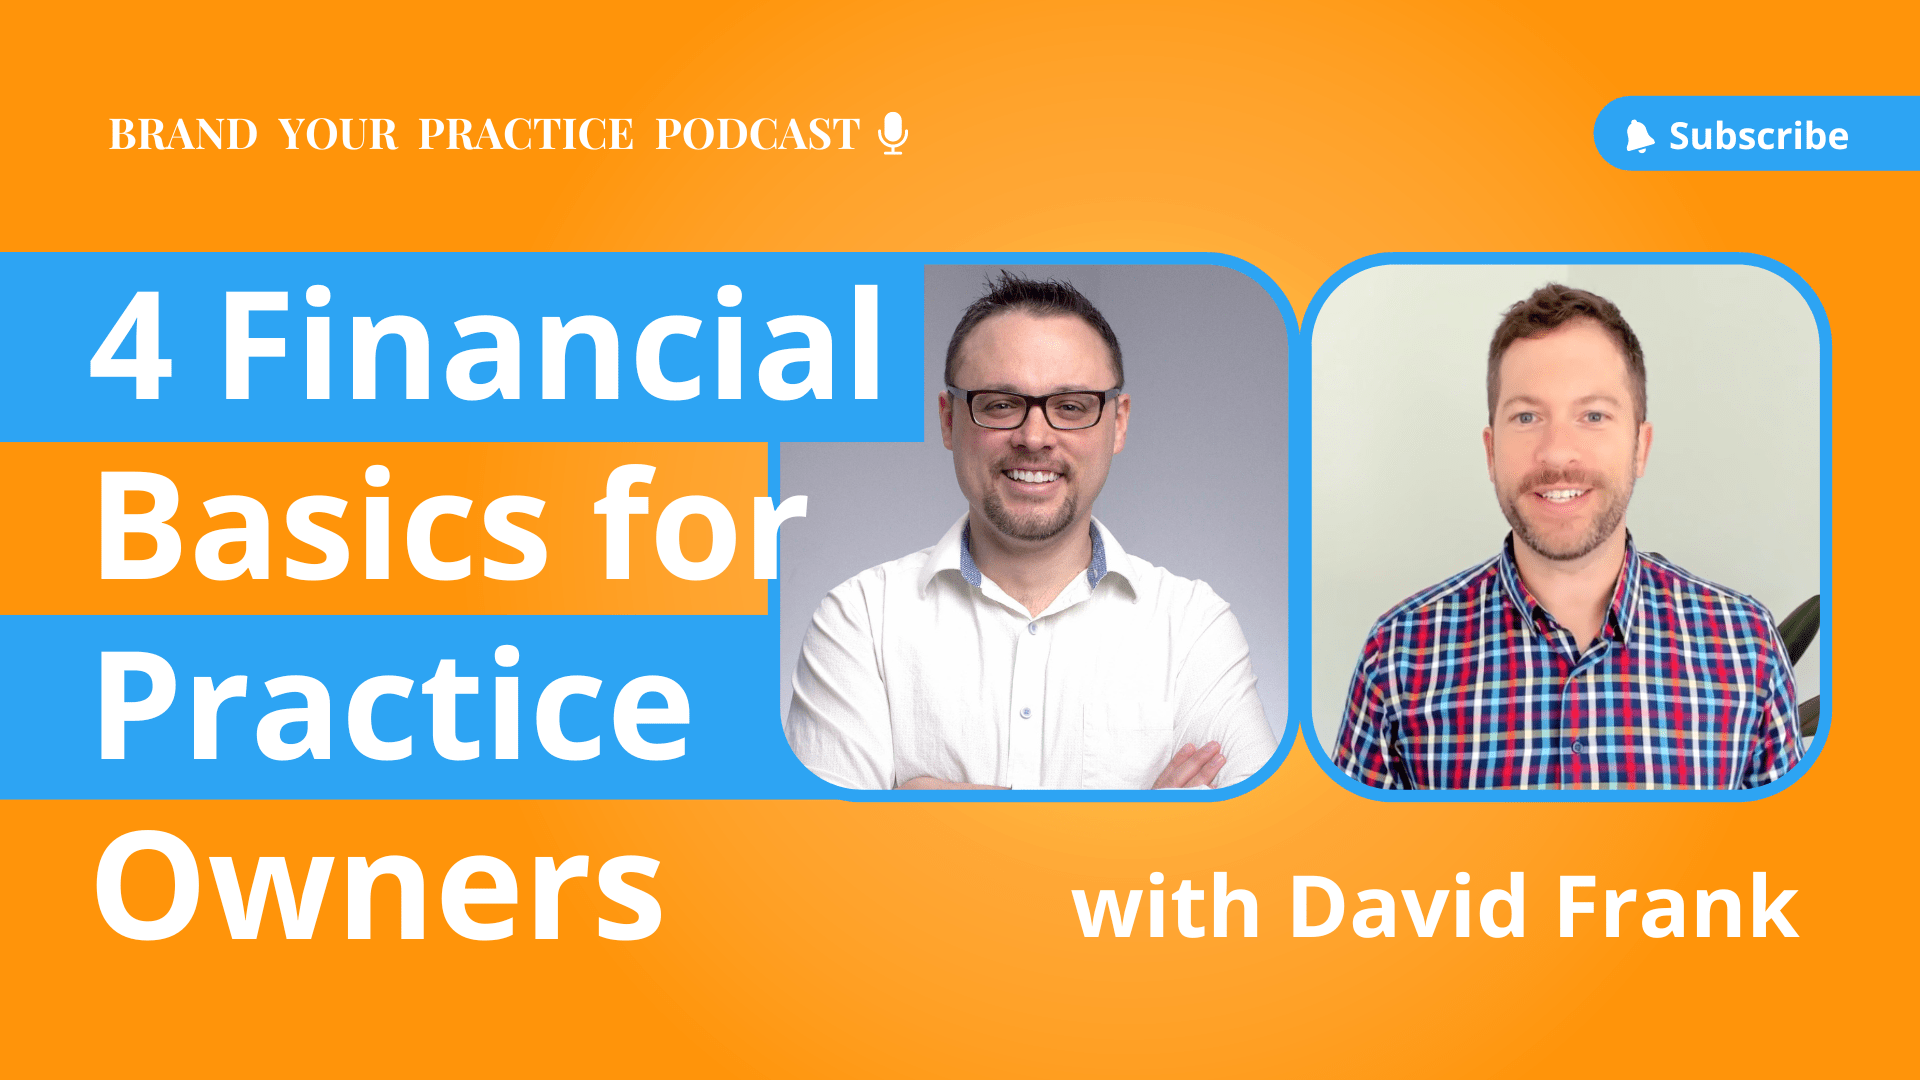 4 Financial Planning Basics for Practice Owners - David Frank